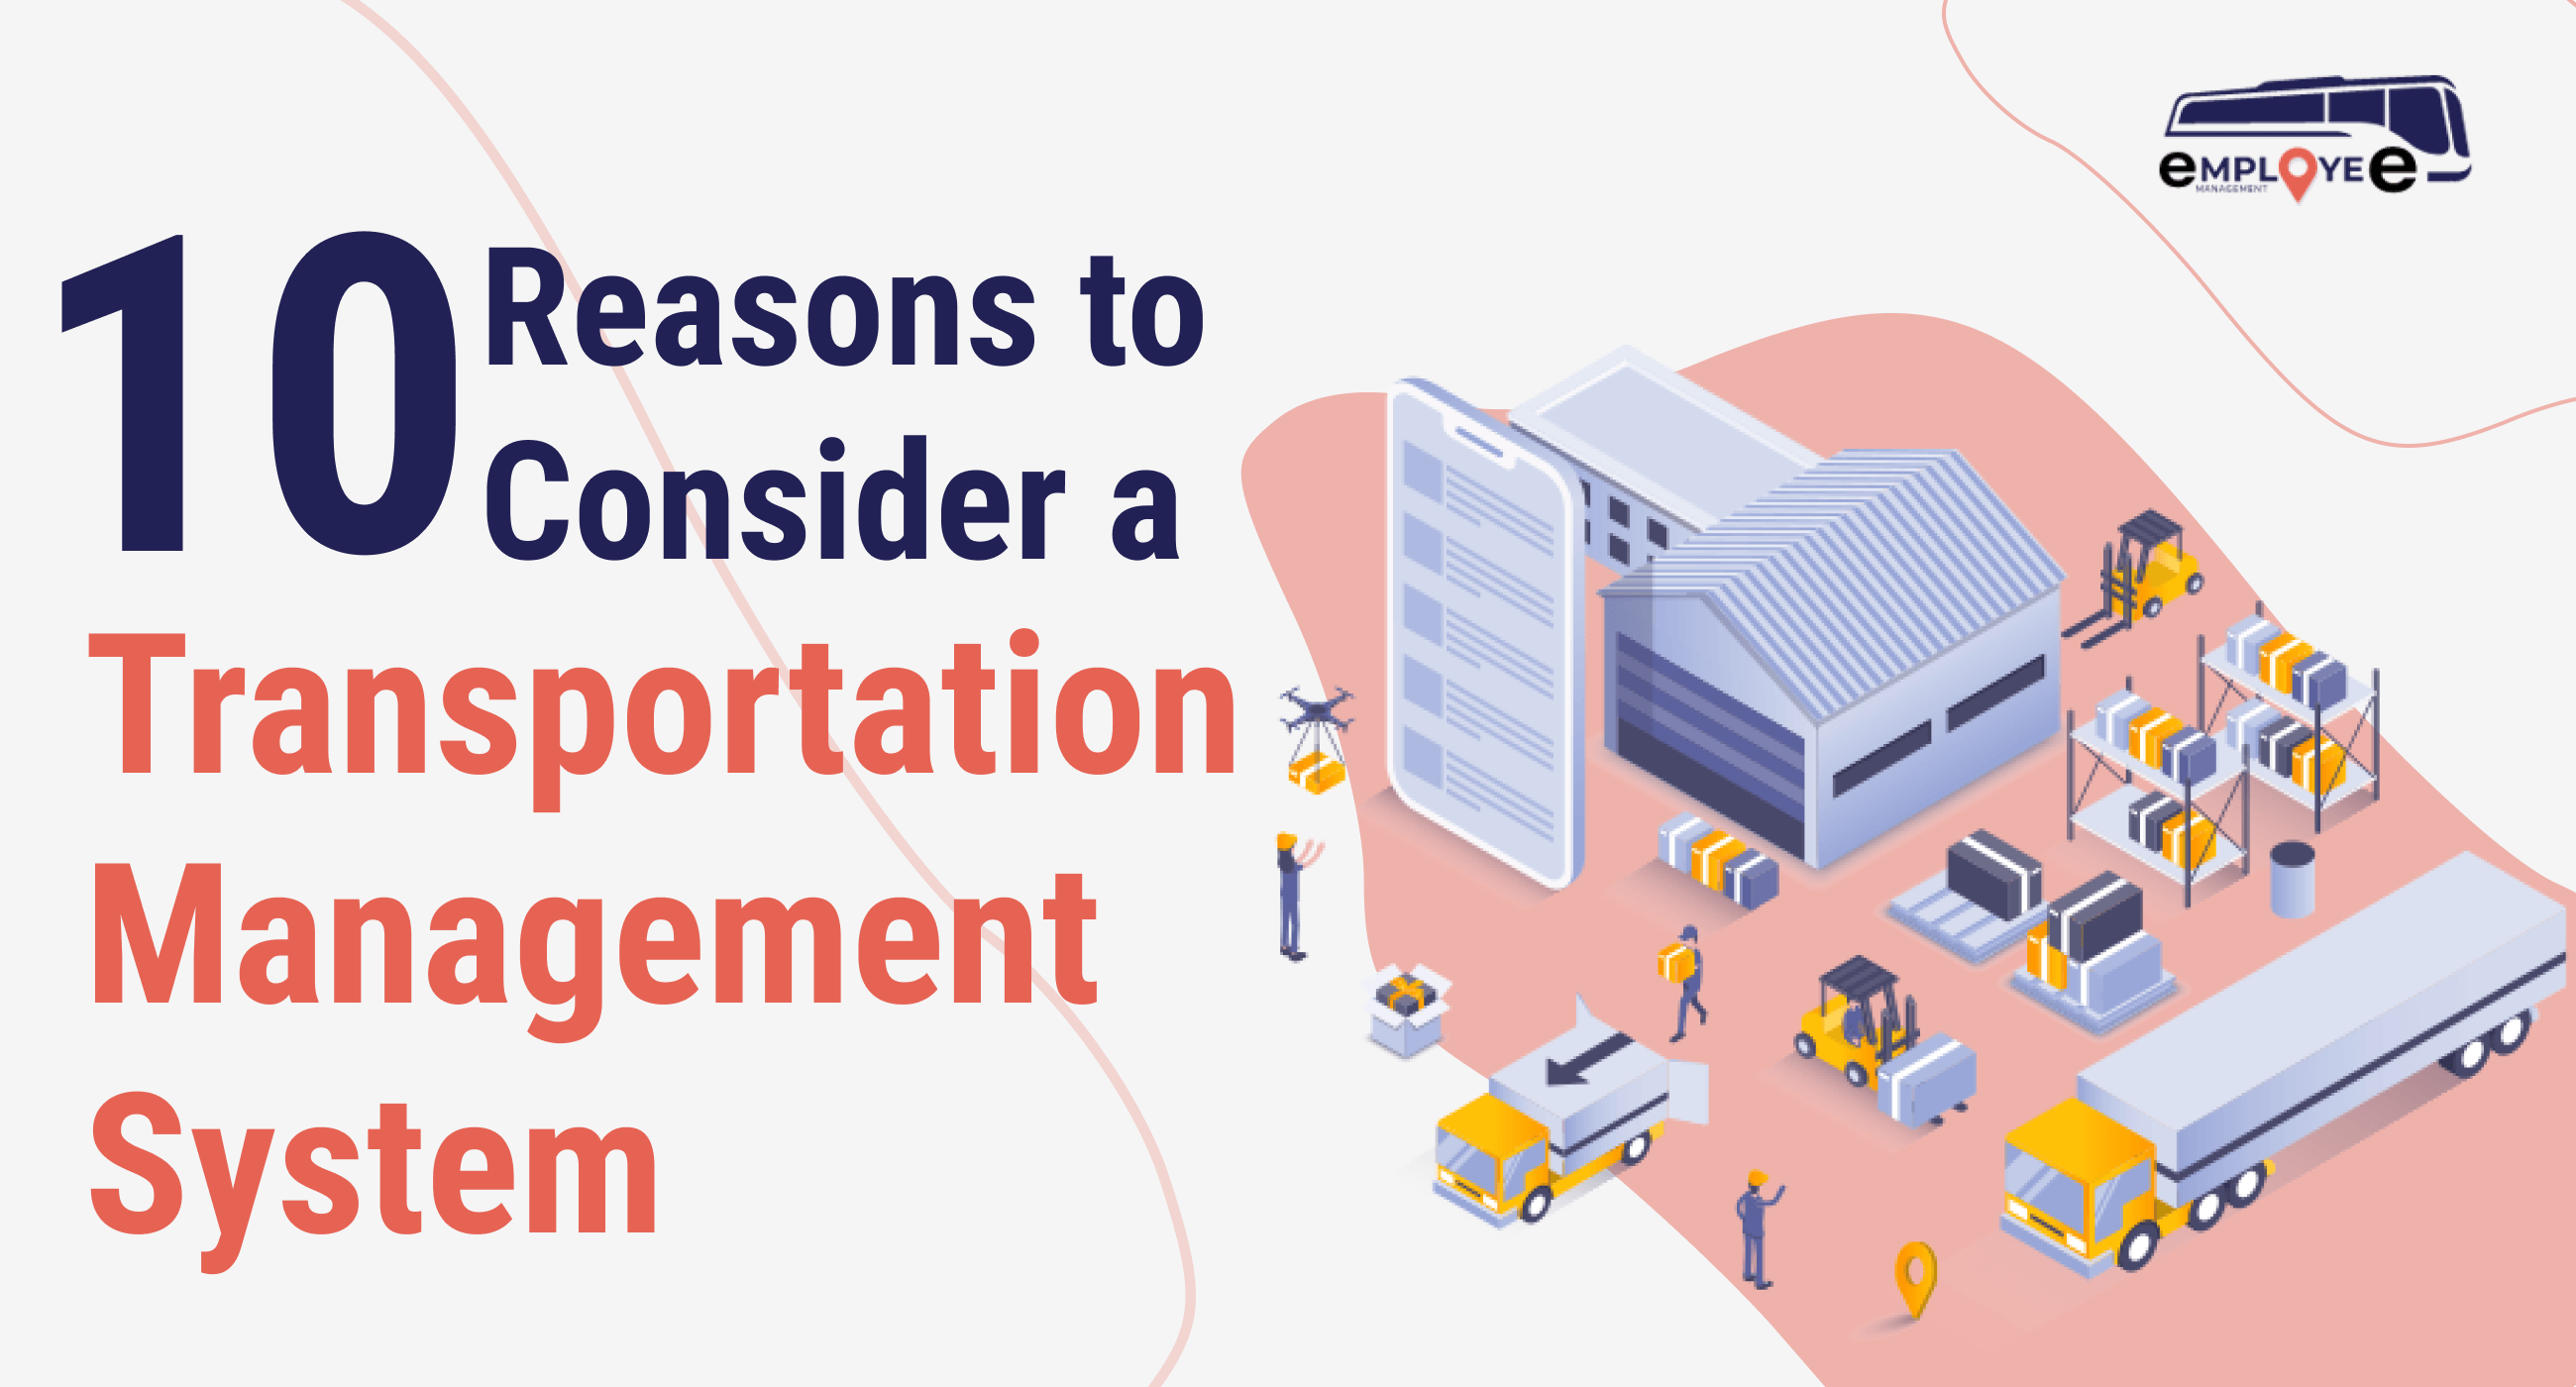 10 Reasons to Consider a Transportation Management System